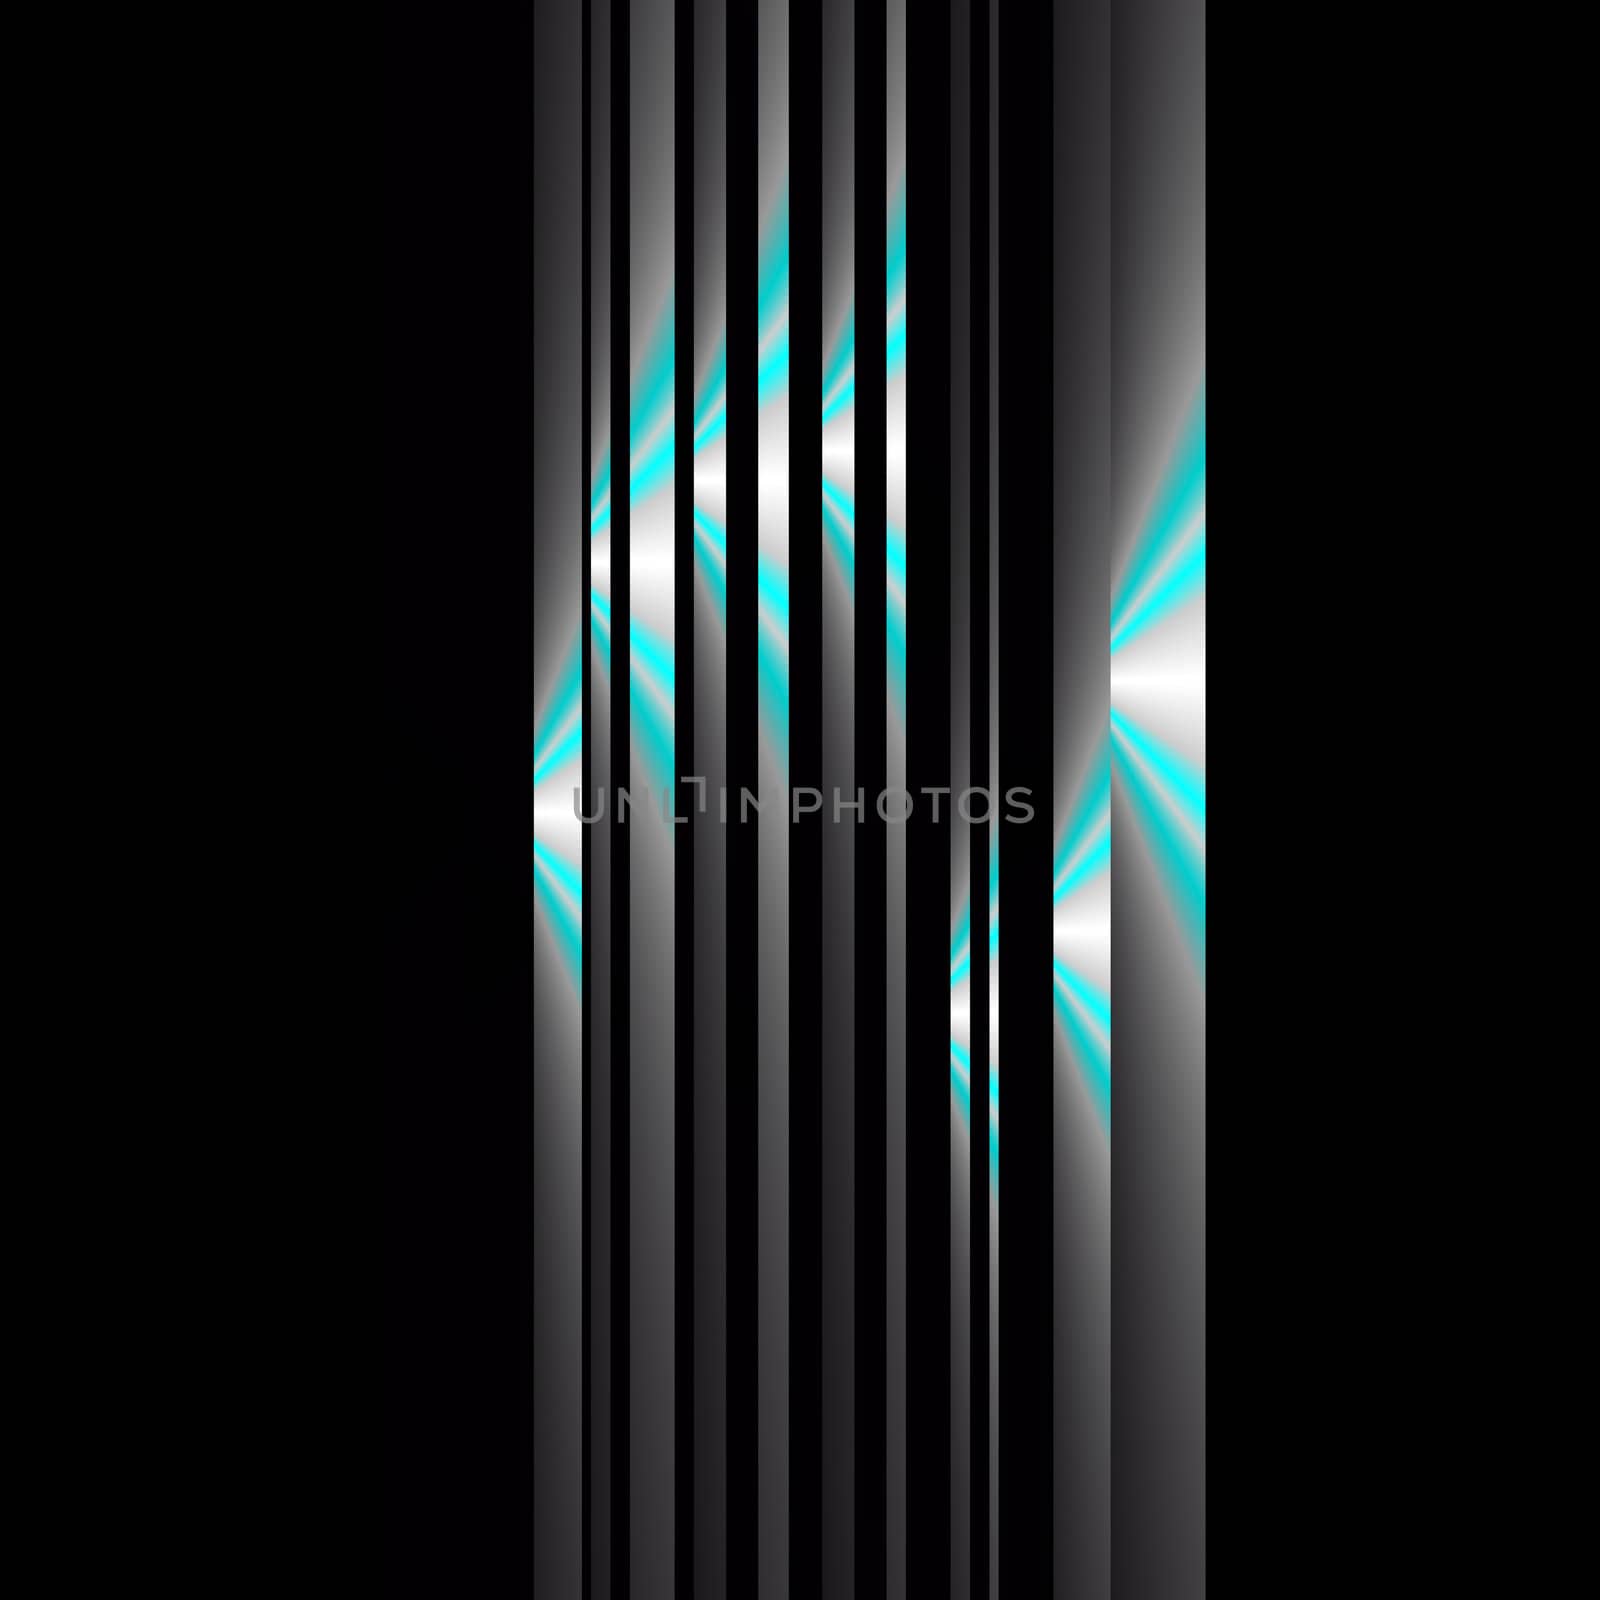 A minimalist fractal with vertical gray bands that have the appearance of steel and diagonal touches of turquoise to look like reflected light.